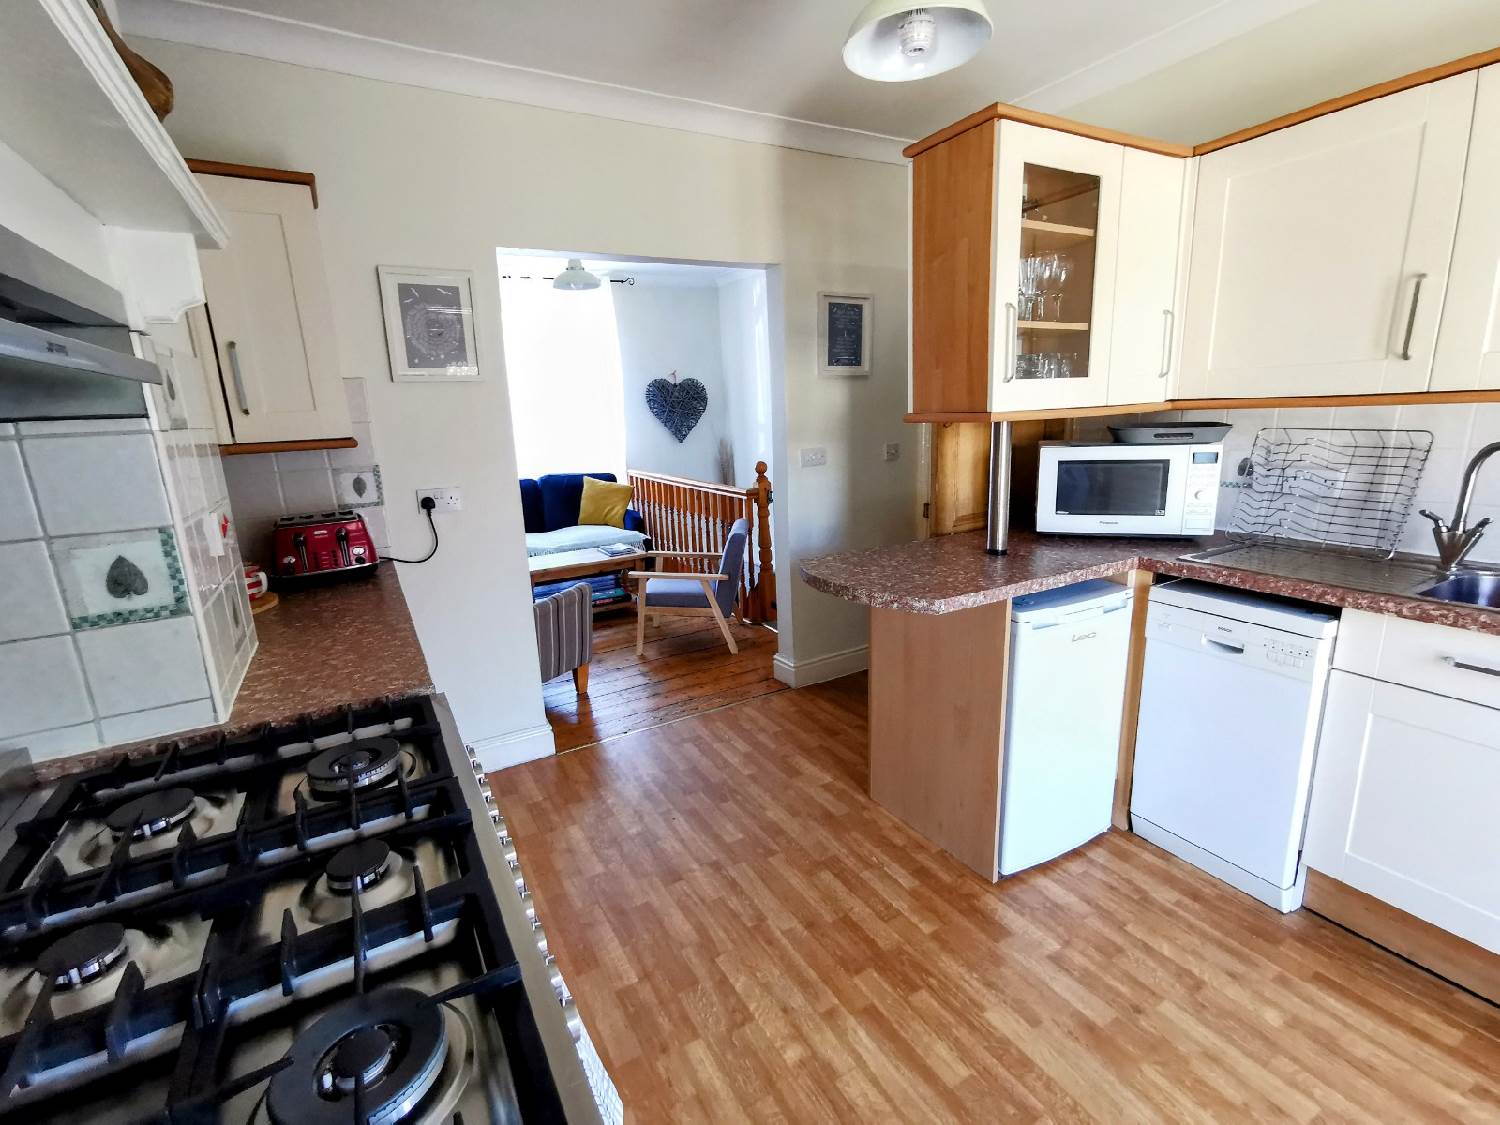 Pilton House Gower's Kitchen has been designed for ease of use